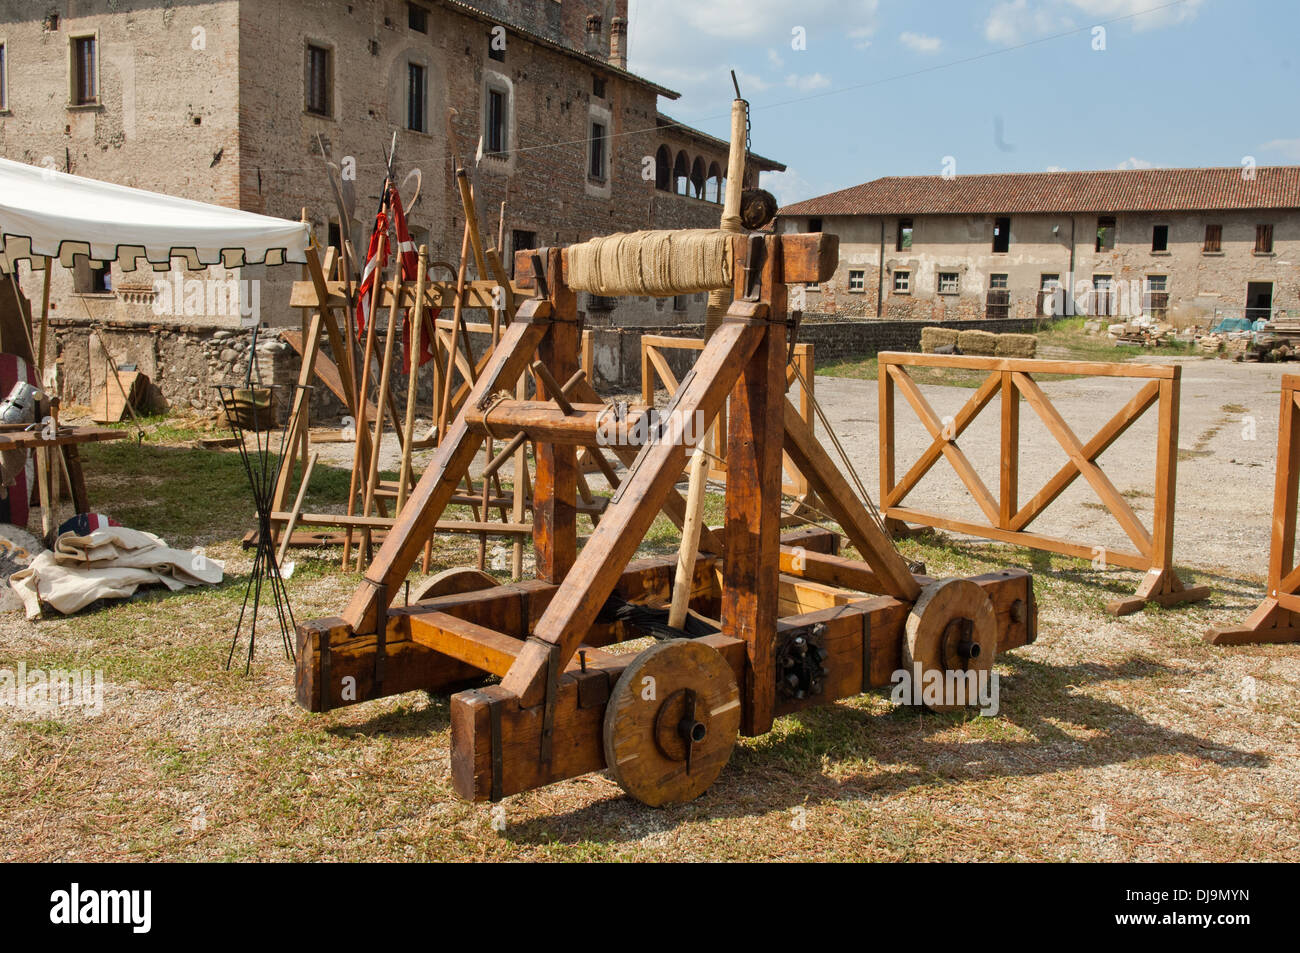 castle, Europe, historical, Italy, Lombardy, Malpaga, traditional, travel, outdoors, medieval catapult Stock Photo